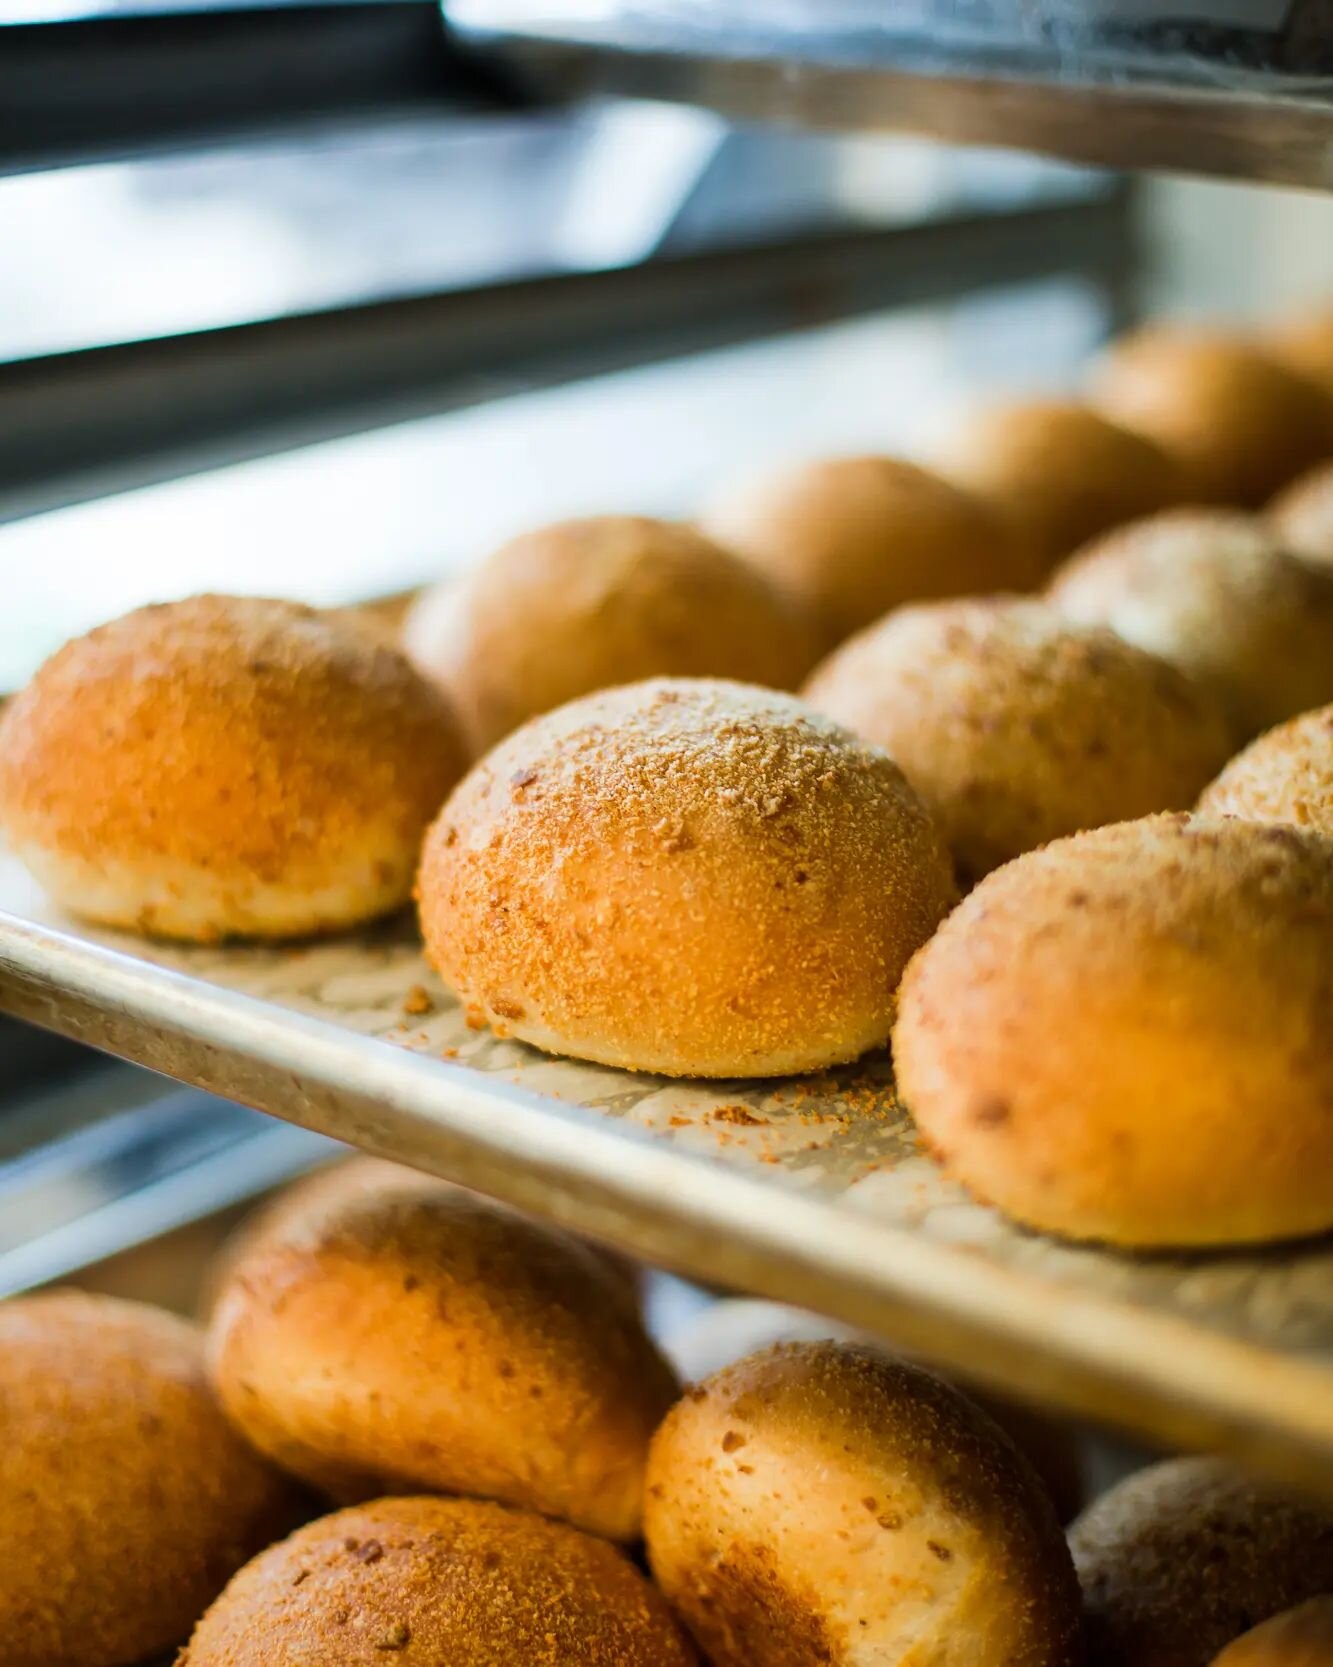 Rise and shine, it's fresh pandesal time!  Pick up a pandesal sando, eat it as is or spread some butter on it.  What's it gonna be today?

#hoodfamous #hoodfamousbakeshop #pandesal #freshpandesal #bakedfresh #bakerylove #filipinocafe #filipinobakery 